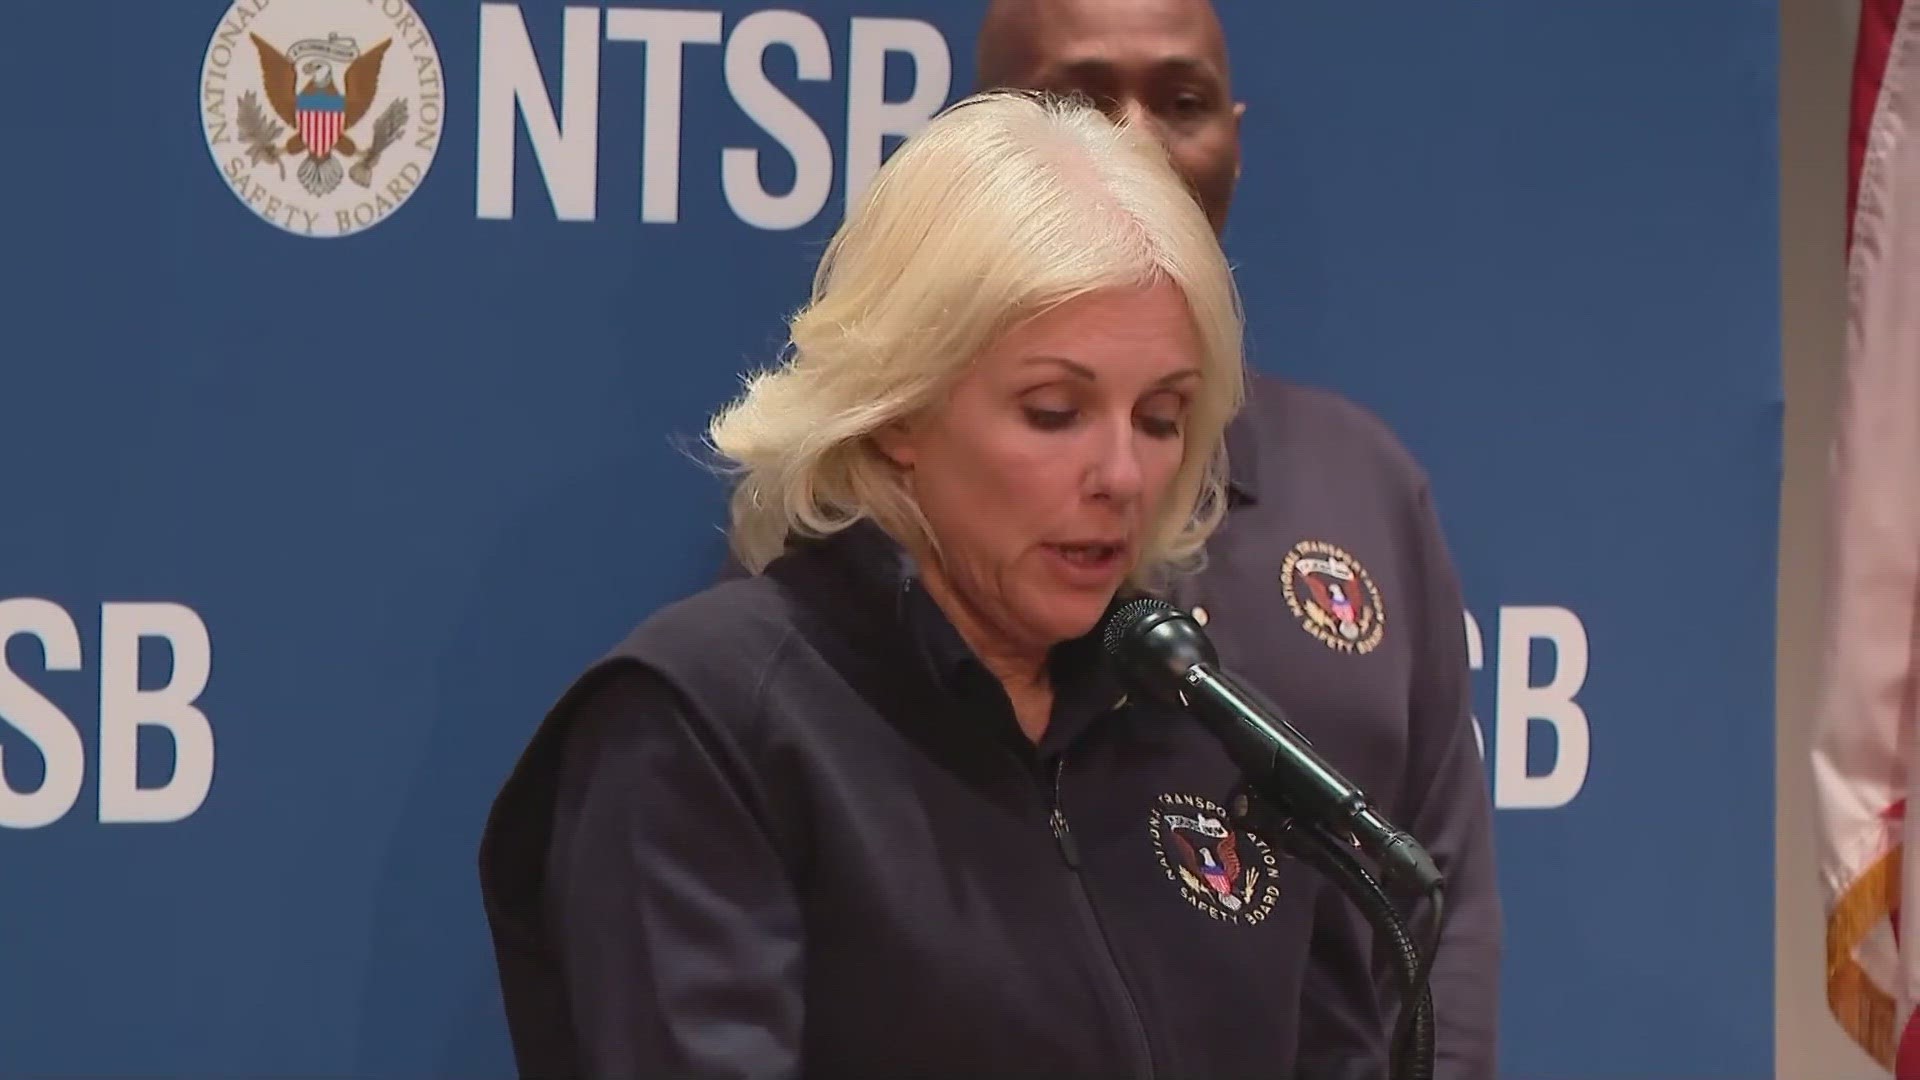 'Typically for these type of events, our investigation will be 12-18 months,' according to National Transportation Safety Board Chair Jennifer Homendy.